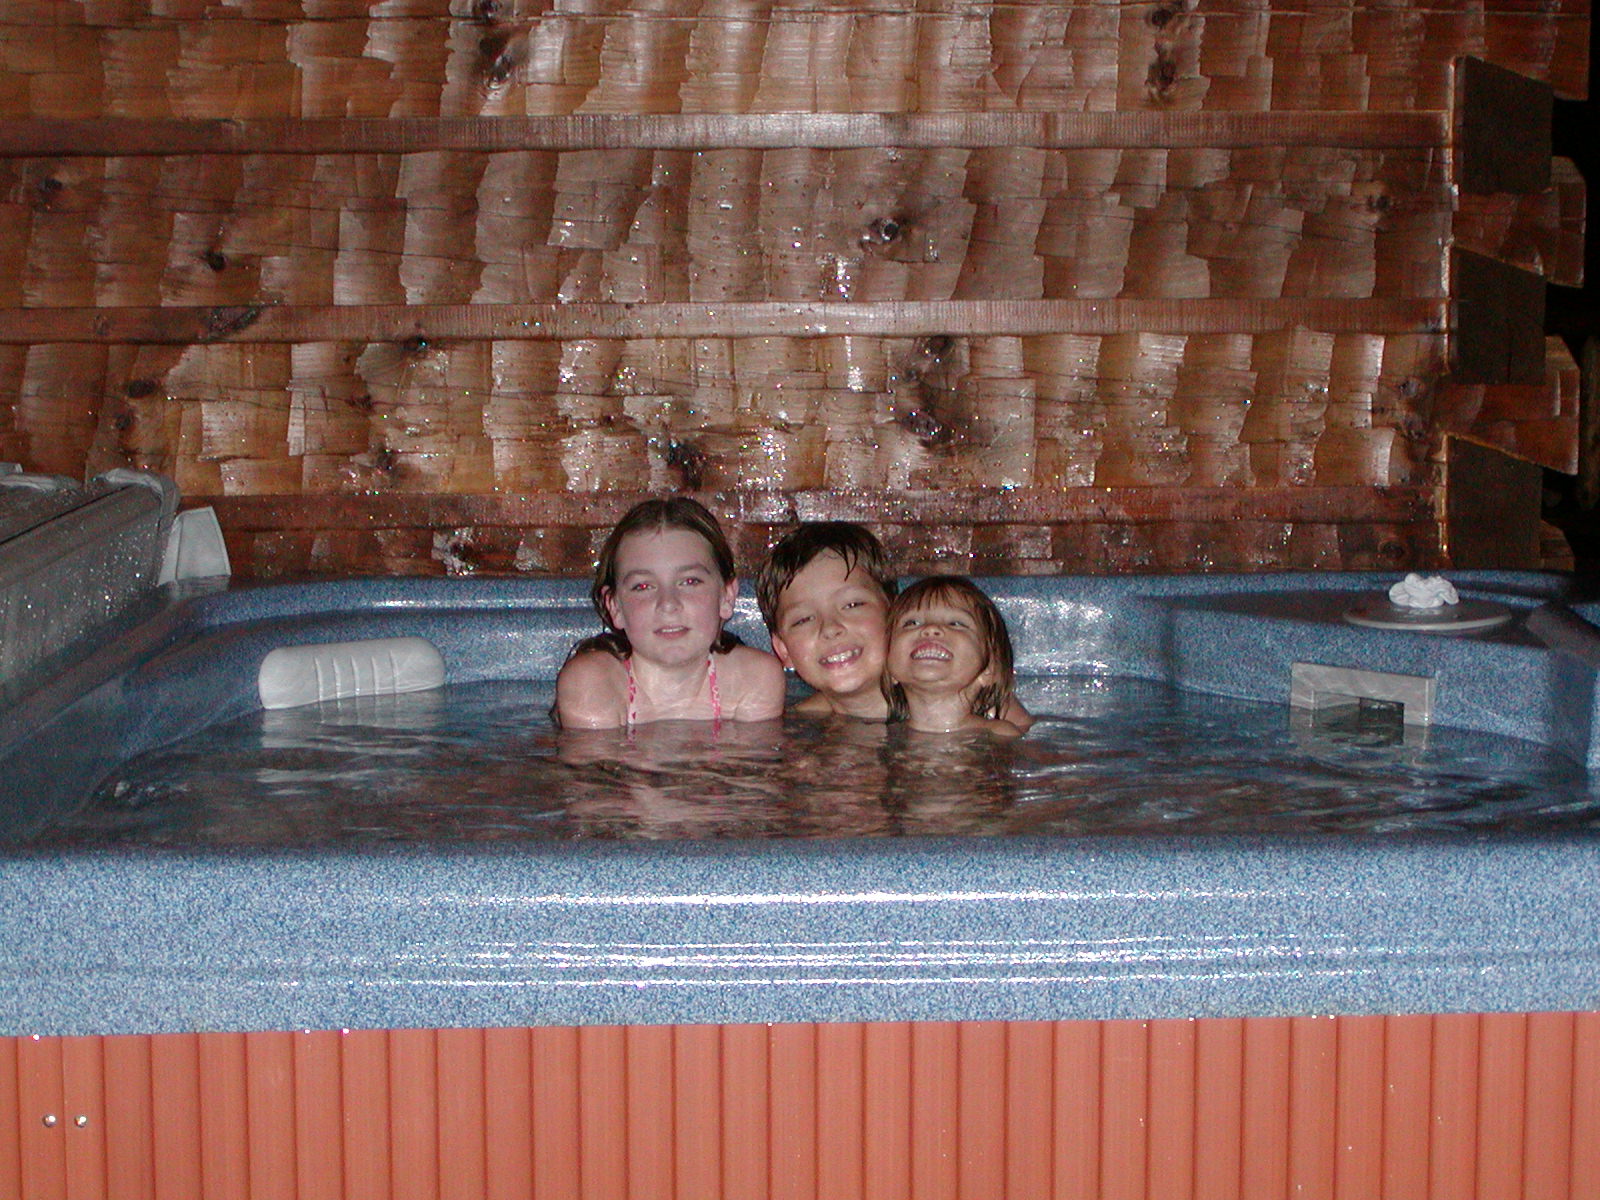 Kristen, Austin And Zoee' In Hot Tub In November 2003...COLD 39 Degrees Outside!